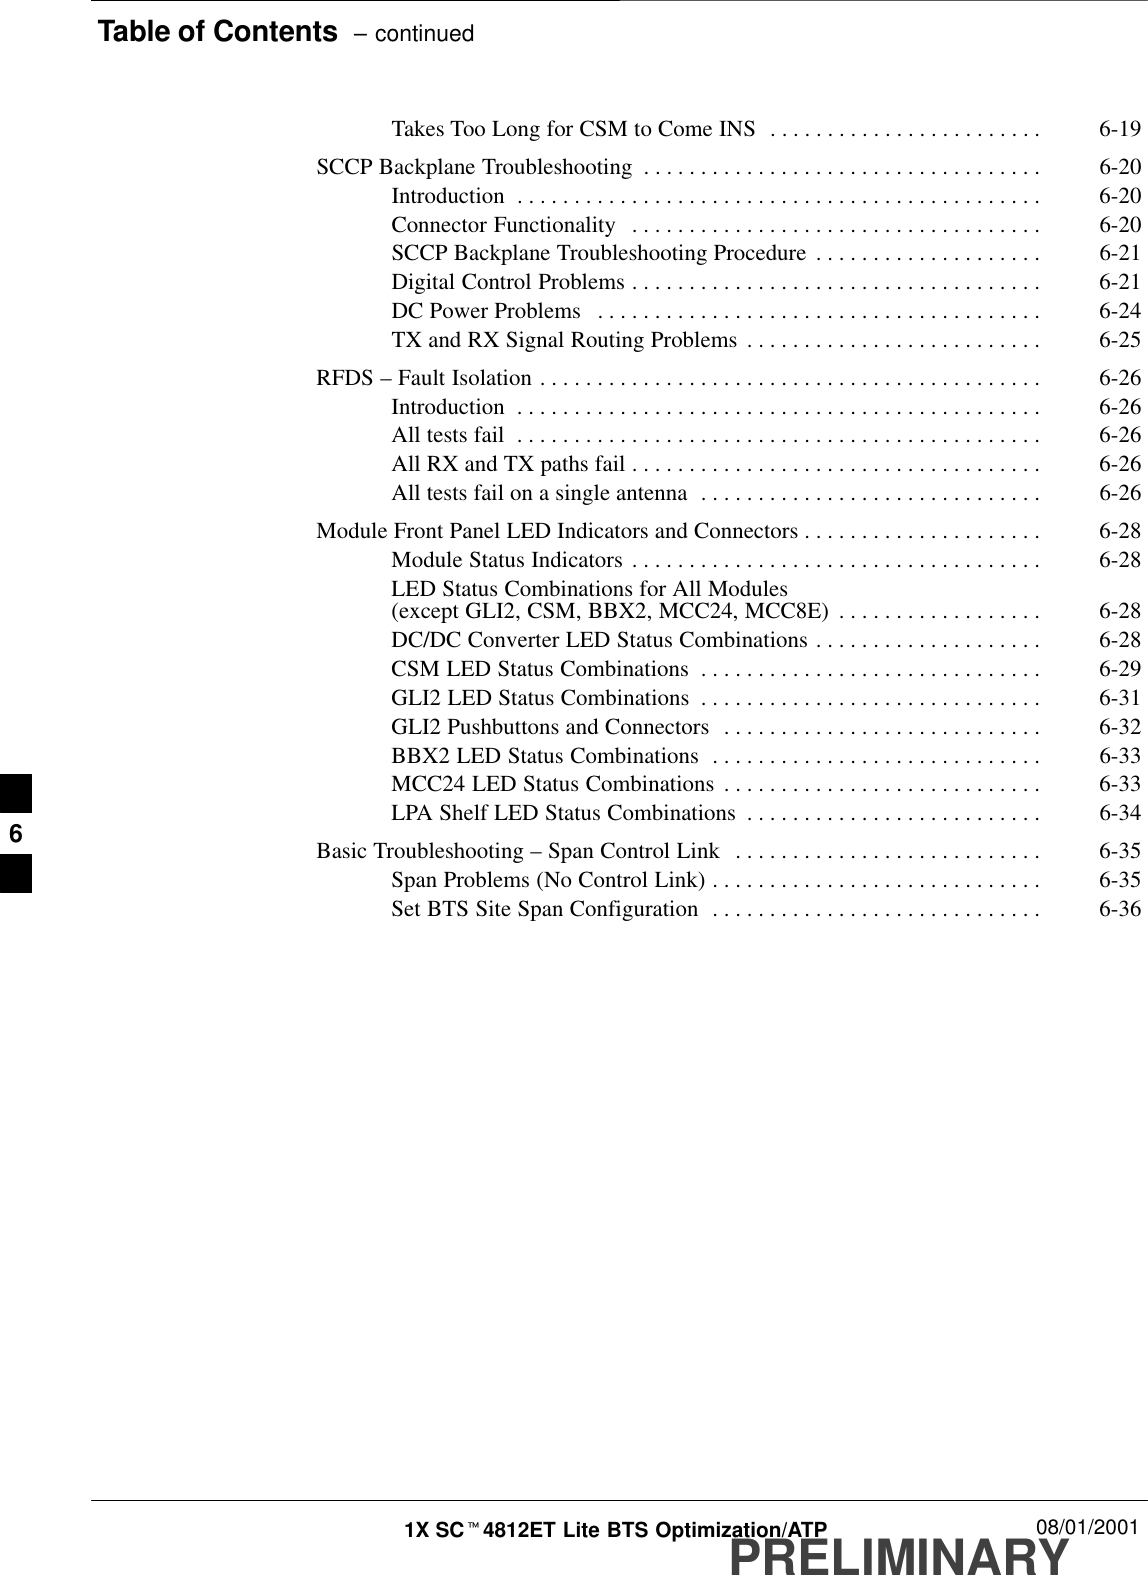 Table of Contents  – continuedPRELIMINARY1X SCt4812ET Lite BTS Optimization/ATP 08/01/2001Takes Too Long for CSM to Come INS 6-19. . . . . . . . . . . . . . . . . . . . . . . . SCCP Backplane Troubleshooting 6-20. . . . . . . . . . . . . . . . . . . . . . . . . . . . . . . . . . . Introduction 6-20. . . . . . . . . . . . . . . . . . . . . . . . . . . . . . . . . . . . . . . . . . . . . . Connector Functionality 6-20. . . . . . . . . . . . . . . . . . . . . . . . . . . . . . . . . . . . SCCP Backplane Troubleshooting Procedure 6-21. . . . . . . . . . . . . . . . . . . . Digital Control Problems 6-21. . . . . . . . . . . . . . . . . . . . . . . . . . . . . . . . . . . . DC Power Problems 6-24. . . . . . . . . . . . . . . . . . . . . . . . . . . . . . . . . . . . . . . TX and RX Signal Routing Problems 6-25. . . . . . . . . . . . . . . . . . . . . . . . . . RFDS – Fault Isolation 6-26. . . . . . . . . . . . . . . . . . . . . . . . . . . . . . . . . . . . . . . . . . . . Introduction 6-26. . . . . . . . . . . . . . . . . . . . . . . . . . . . . . . . . . . . . . . . . . . . . . All tests fail 6-26. . . . . . . . . . . . . . . . . . . . . . . . . . . . . . . . . . . . . . . . . . . . . . All RX and TX paths fail 6-26. . . . . . . . . . . . . . . . . . . . . . . . . . . . . . . . . . . . All tests fail on a single antenna 6-26. . . . . . . . . . . . . . . . . . . . . . . . . . . . . . Module Front Panel LED Indicators and Connectors 6-28. . . . . . . . . . . . . . . . . . . . . Module Status Indicators 6-28. . . . . . . . . . . . . . . . . . . . . . . . . . . . . . . . . . . . LED Status Combinations for All Modules (except GLI2, CSM, BBX2, MCC24, MCC8E) 6-28. . . . . . . . . . . . . . . . . . DC/DC Converter LED Status Combinations 6-28. . . . . . . . . . . . . . . . . . . . CSM LED Status Combinations 6-29. . . . . . . . . . . . . . . . . . . . . . . . . . . . . . GLI2 LED Status Combinations 6-31. . . . . . . . . . . . . . . . . . . . . . . . . . . . . . GLI2 Pushbuttons and Connectors 6-32. . . . . . . . . . . . . . . . . . . . . . . . . . . . BBX2 LED Status Combinations 6-33. . . . . . . . . . . . . . . . . . . . . . . . . . . . . MCC24 LED Status Combinations 6-33. . . . . . . . . . . . . . . . . . . . . . . . . . . . LPA Shelf LED Status Combinations 6-34. . . . . . . . . . . . . . . . . . . . . . . . . . Basic Troubleshooting – Span Control Link 6-35. . . . . . . . . . . . . . . . . . . . . . . . . . . Span Problems (No Control Link) 6-35. . . . . . . . . . . . . . . . . . . . . . . . . . . . . Set BTS Site Span Configuration 6-36. . . . . . . . . . . . . . . . . . . . . . . . . . . . . 6